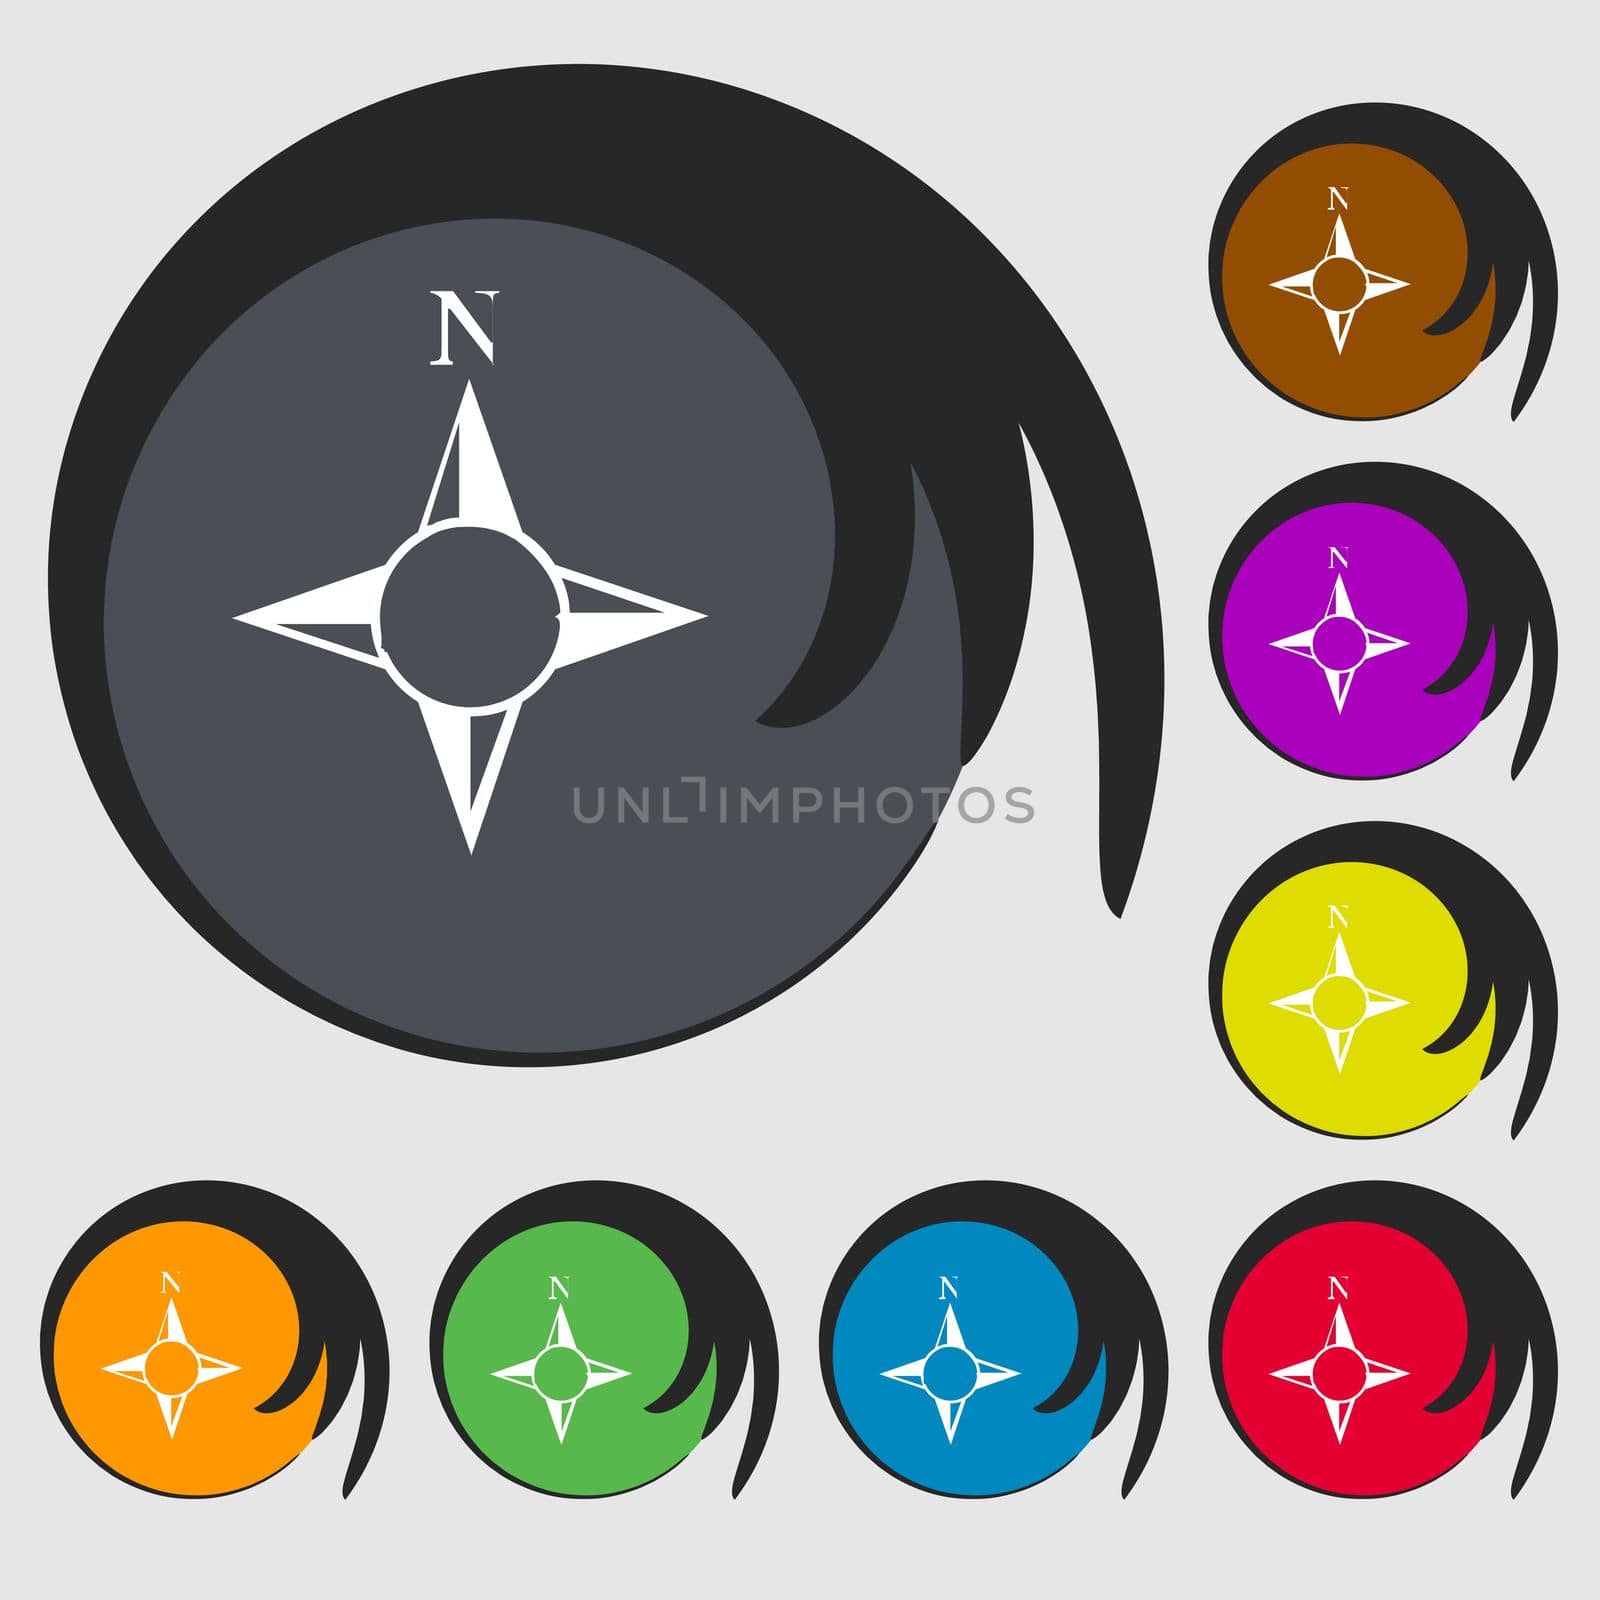 Compass sign icon. Windrose navigation symbol. Symbols on eight colored buttons. illustration